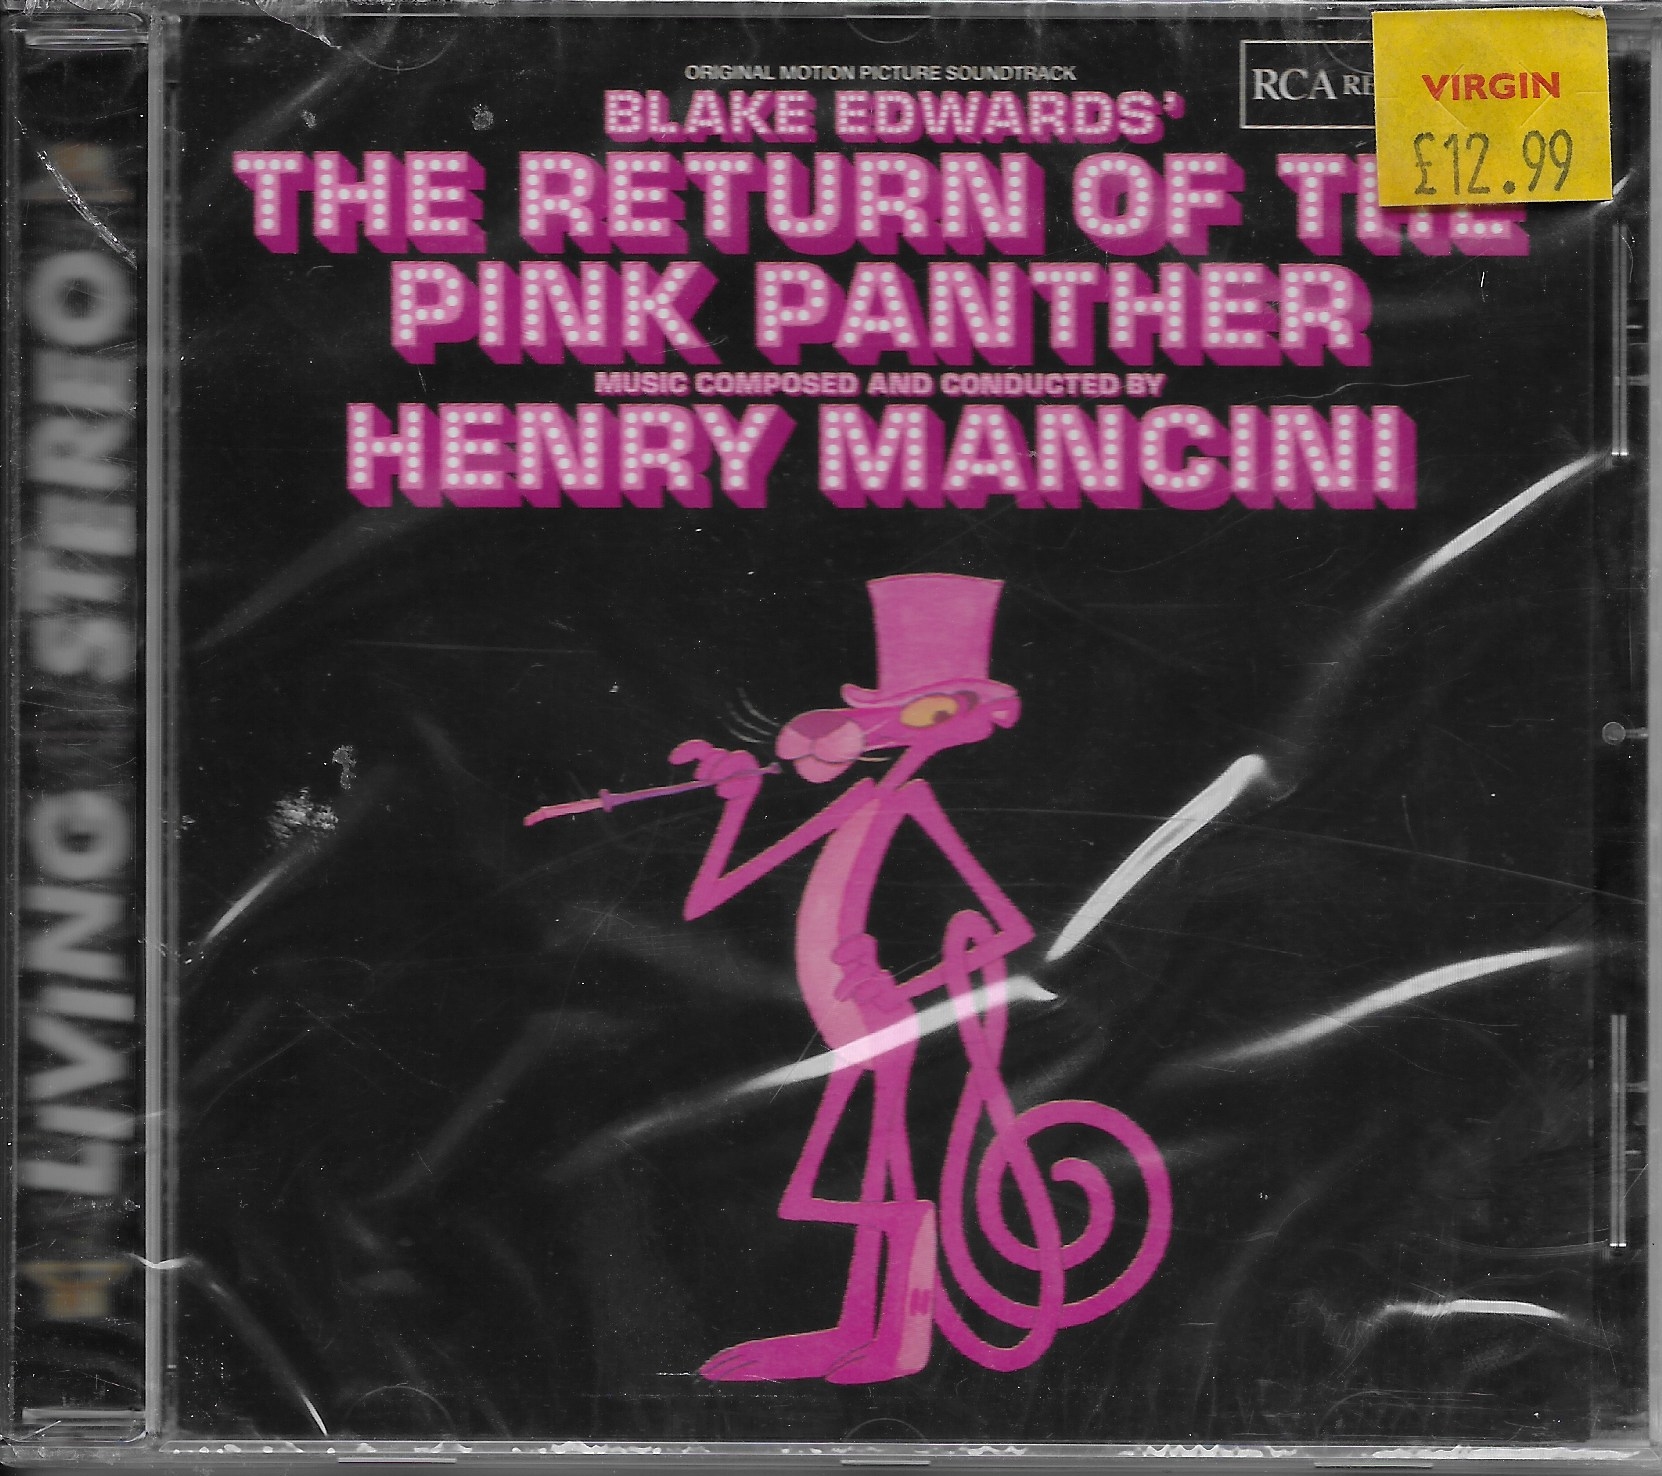 Picture of The return of the Pink Panther by artist Henry Mancini from ITV, Channel 4 and Channel 5 cds library